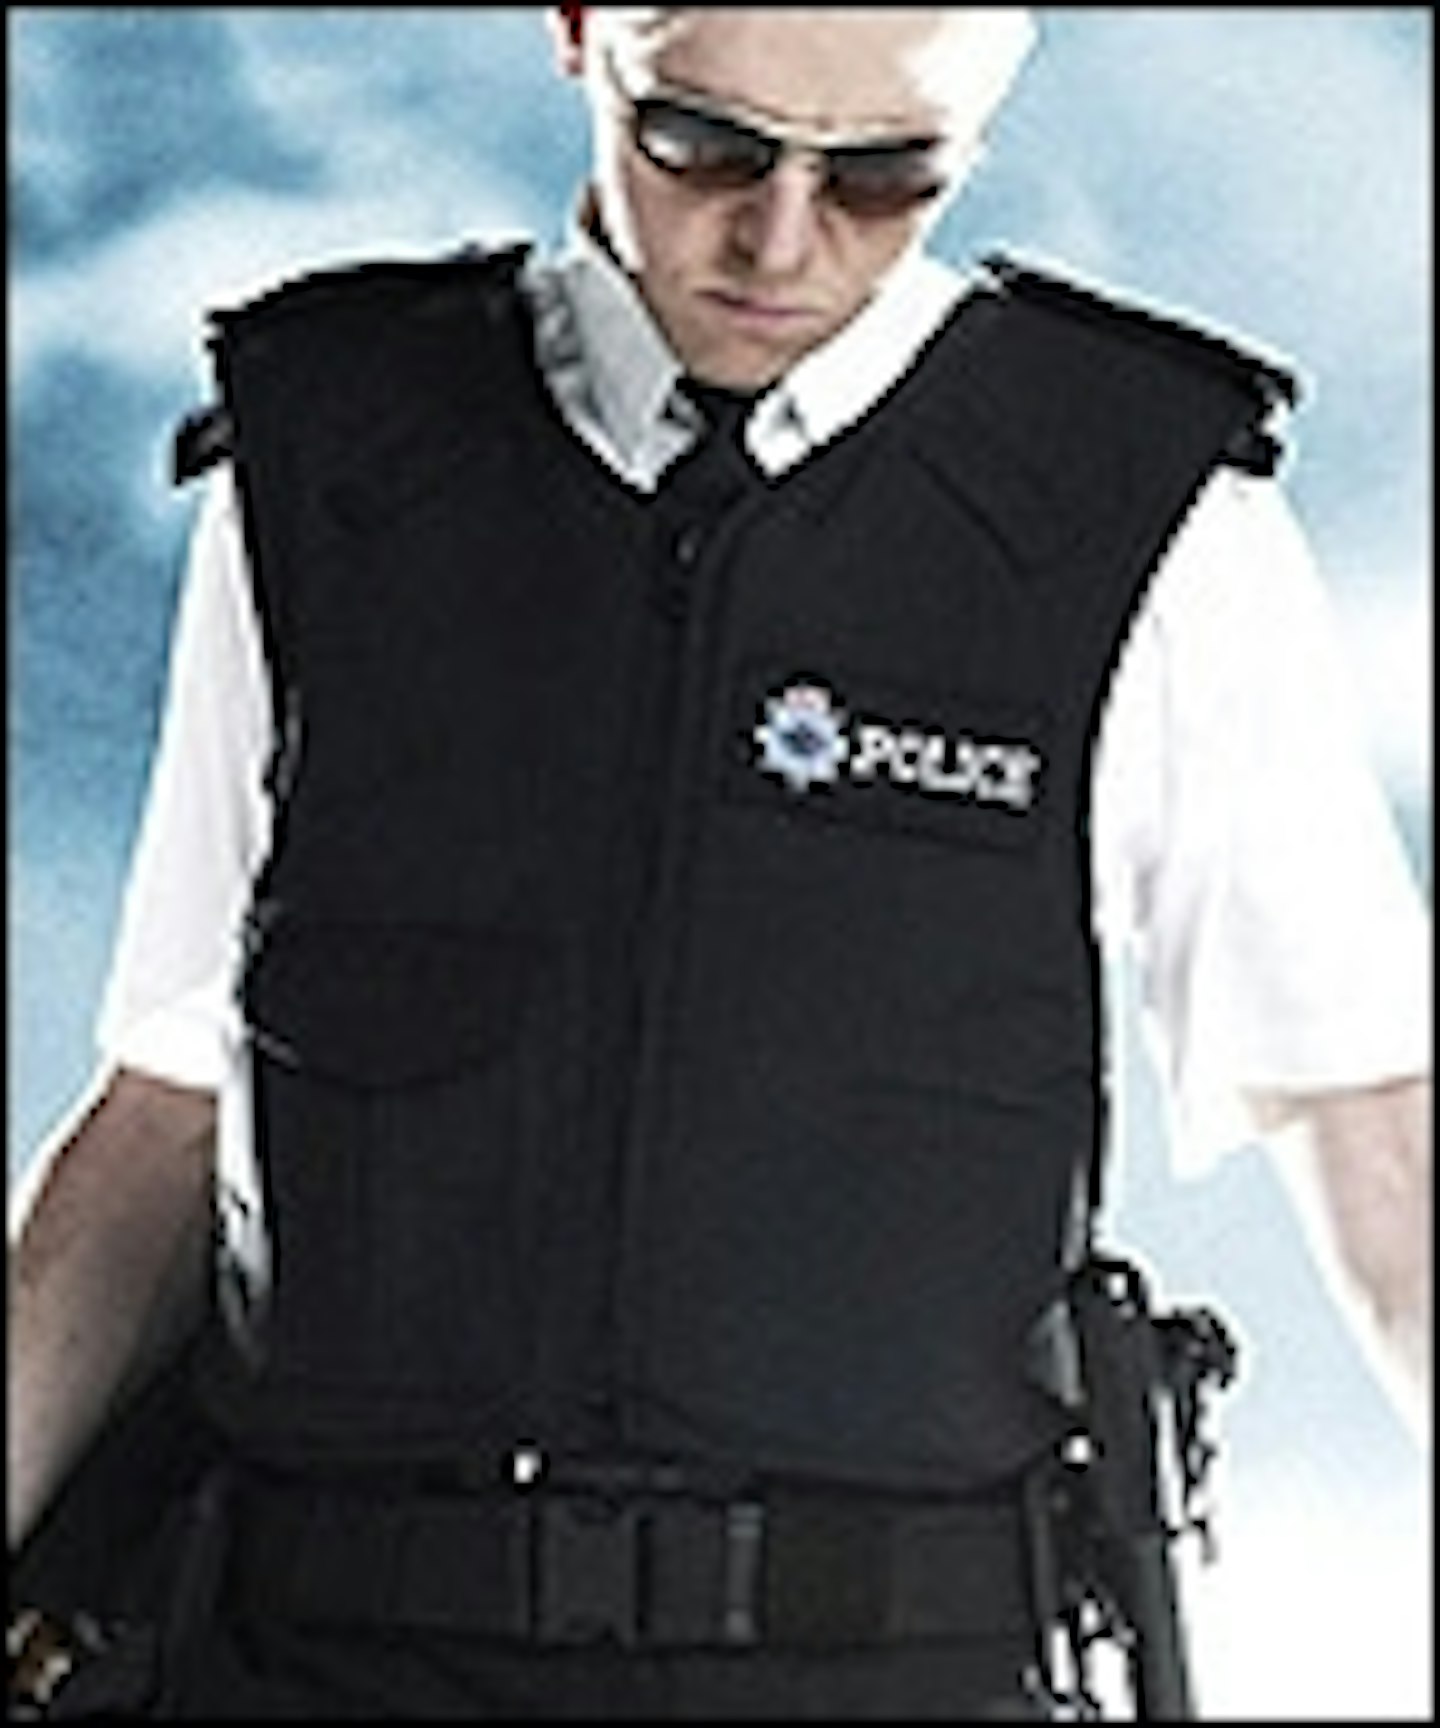 Hot Fuzz: Official Site Launched